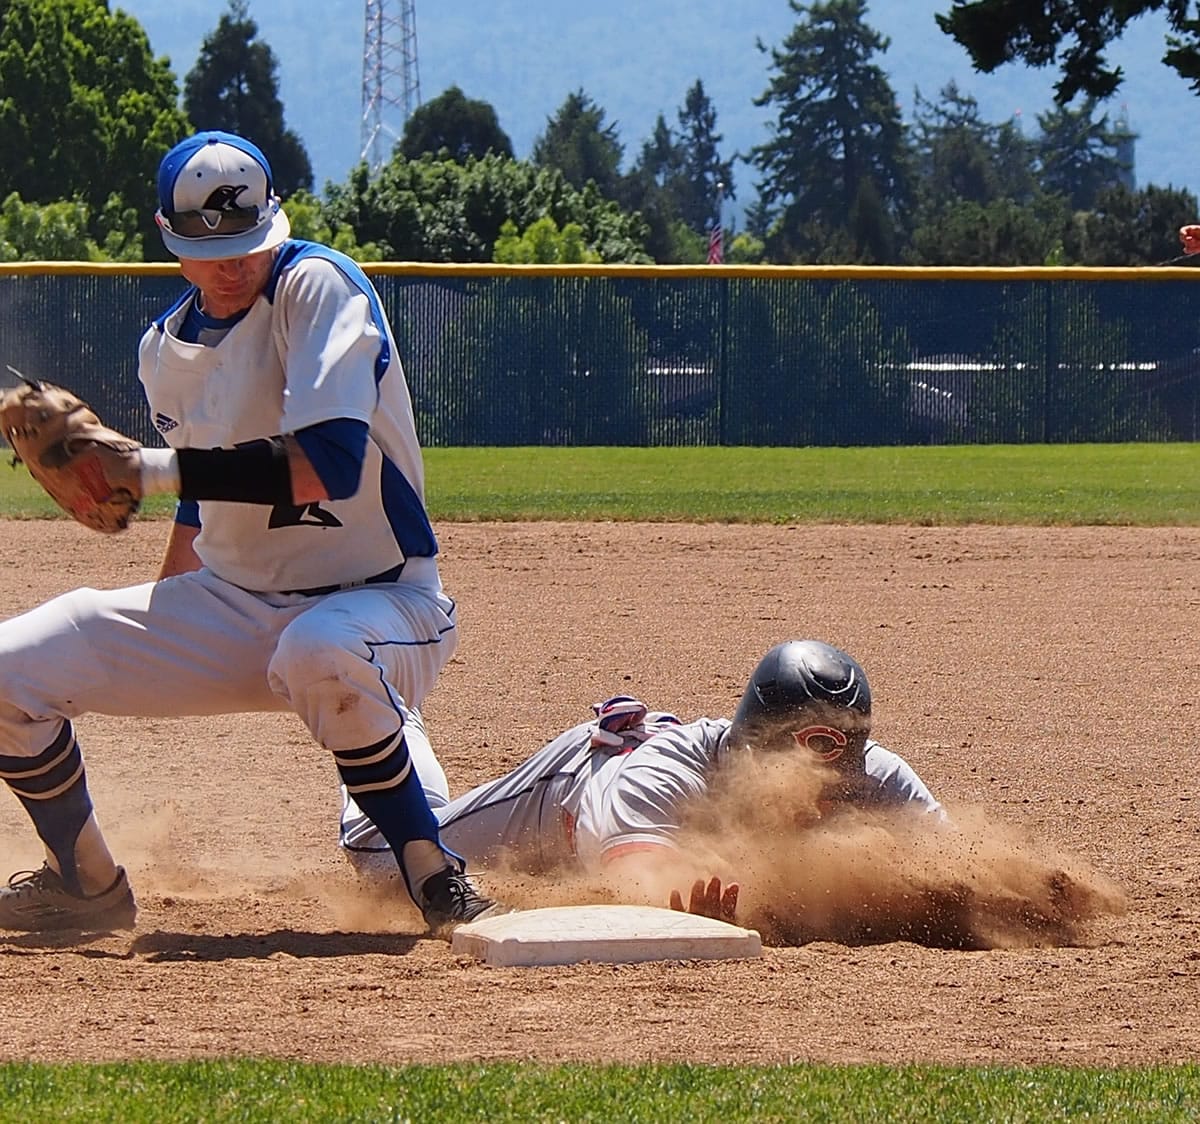 Clackamas base runner Shane Suyama dives back to first base as Clark College's Boyd Lainhart turns to make a tag during the first game of a doubleheader on Saturday, May 9, 2015, at Kindsfather Field.